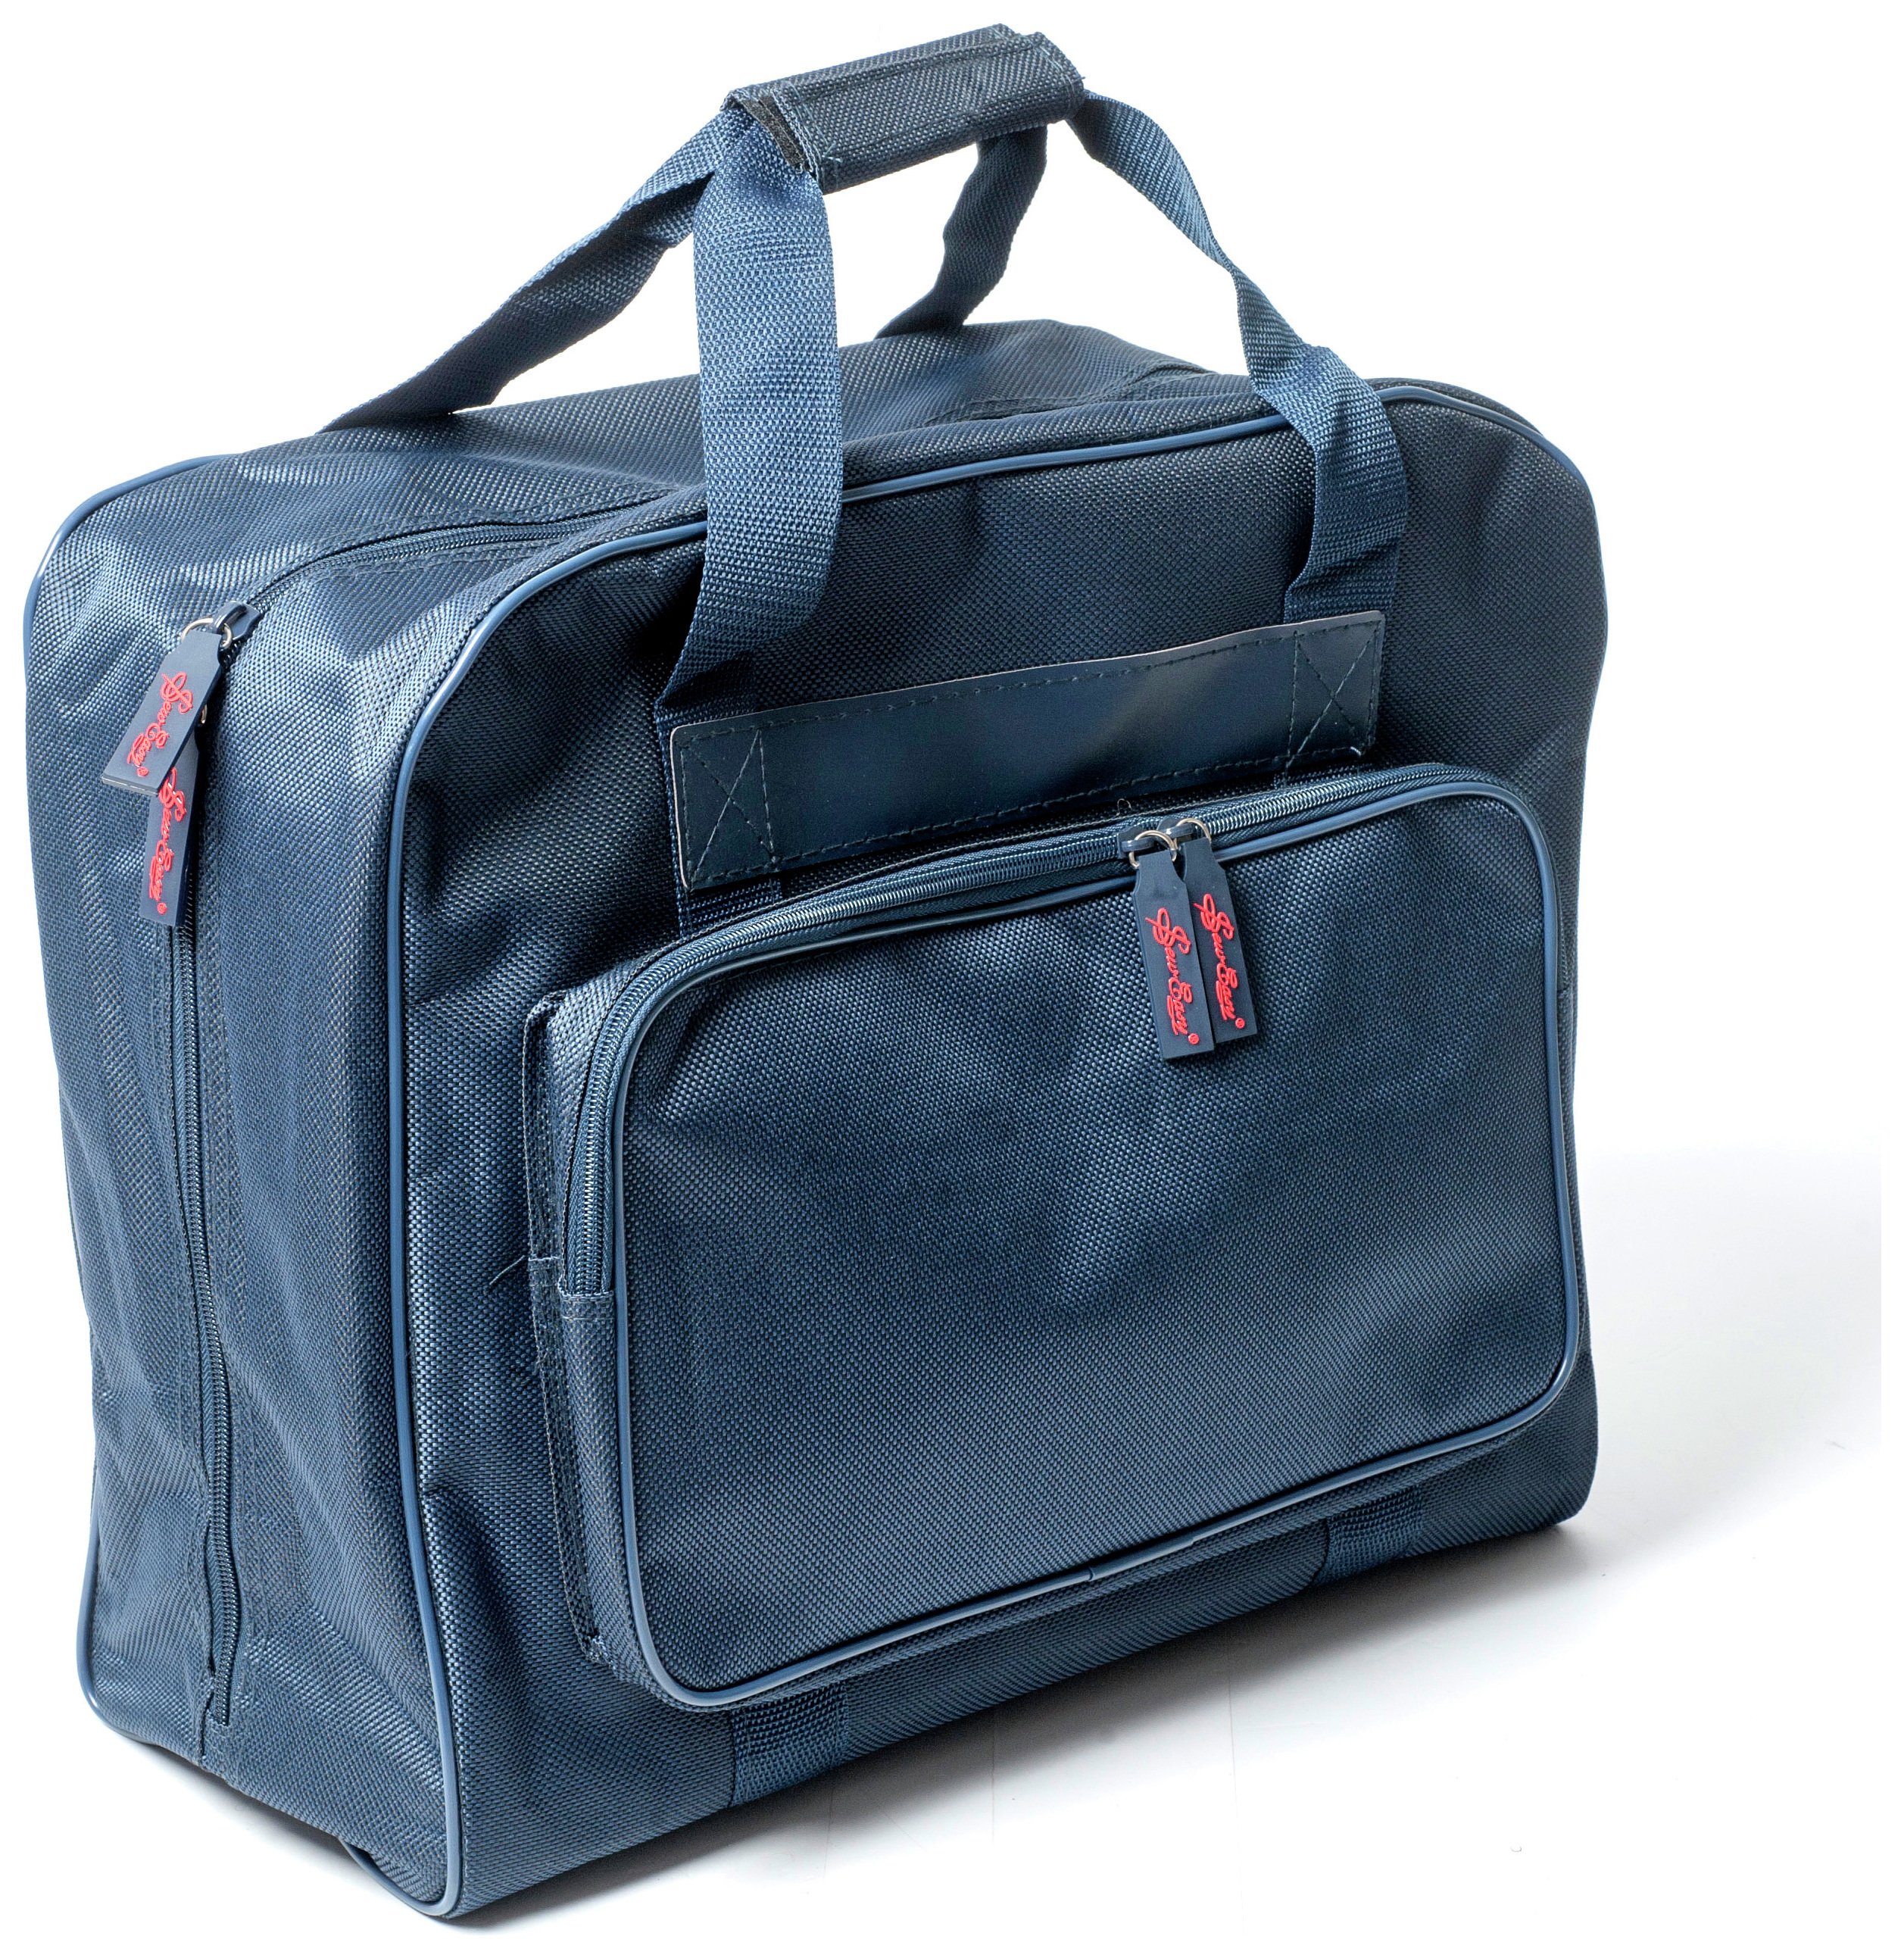 Heavy Duty Polyester Sewing Machine Carry Bag - Blue